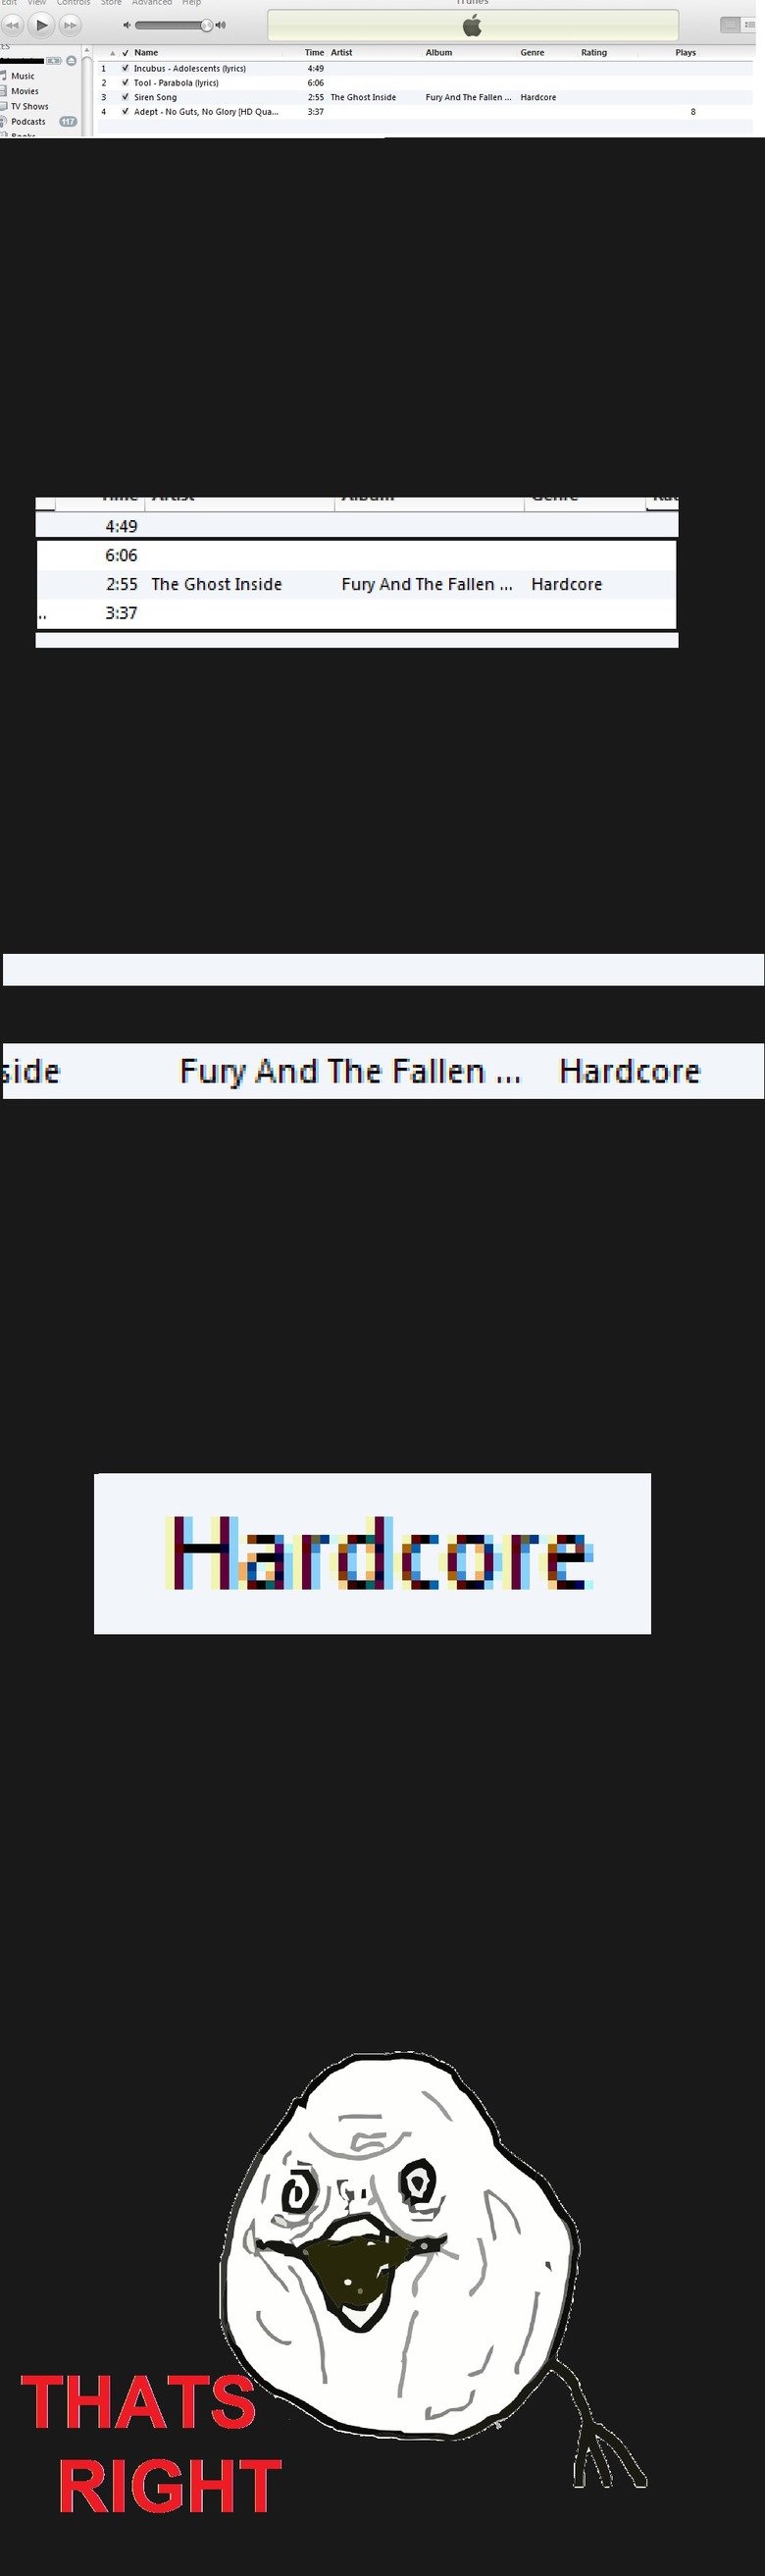 Hardcore music. OC. Harmer: Fury. And The Fallen Hardcore in Furb. rand The Fallen .. Hardcore Hard cu: -re. We all thought the same thing...